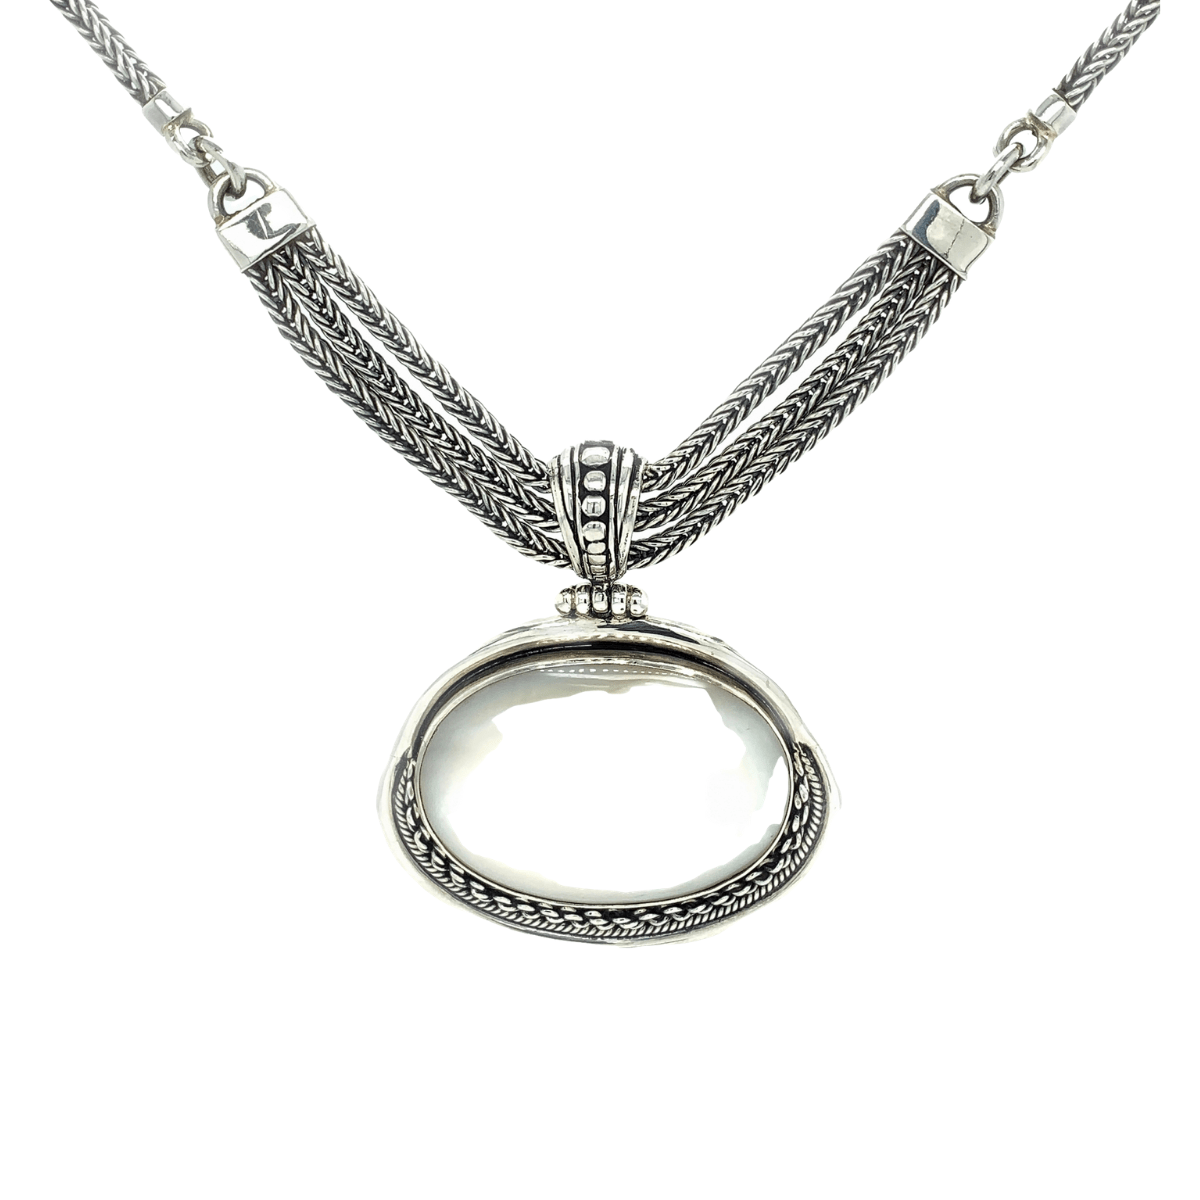 Large Mother-of-Pearl Medallion &amp; Sterling Silver Necklace - Qinti - The Peruvian Shop